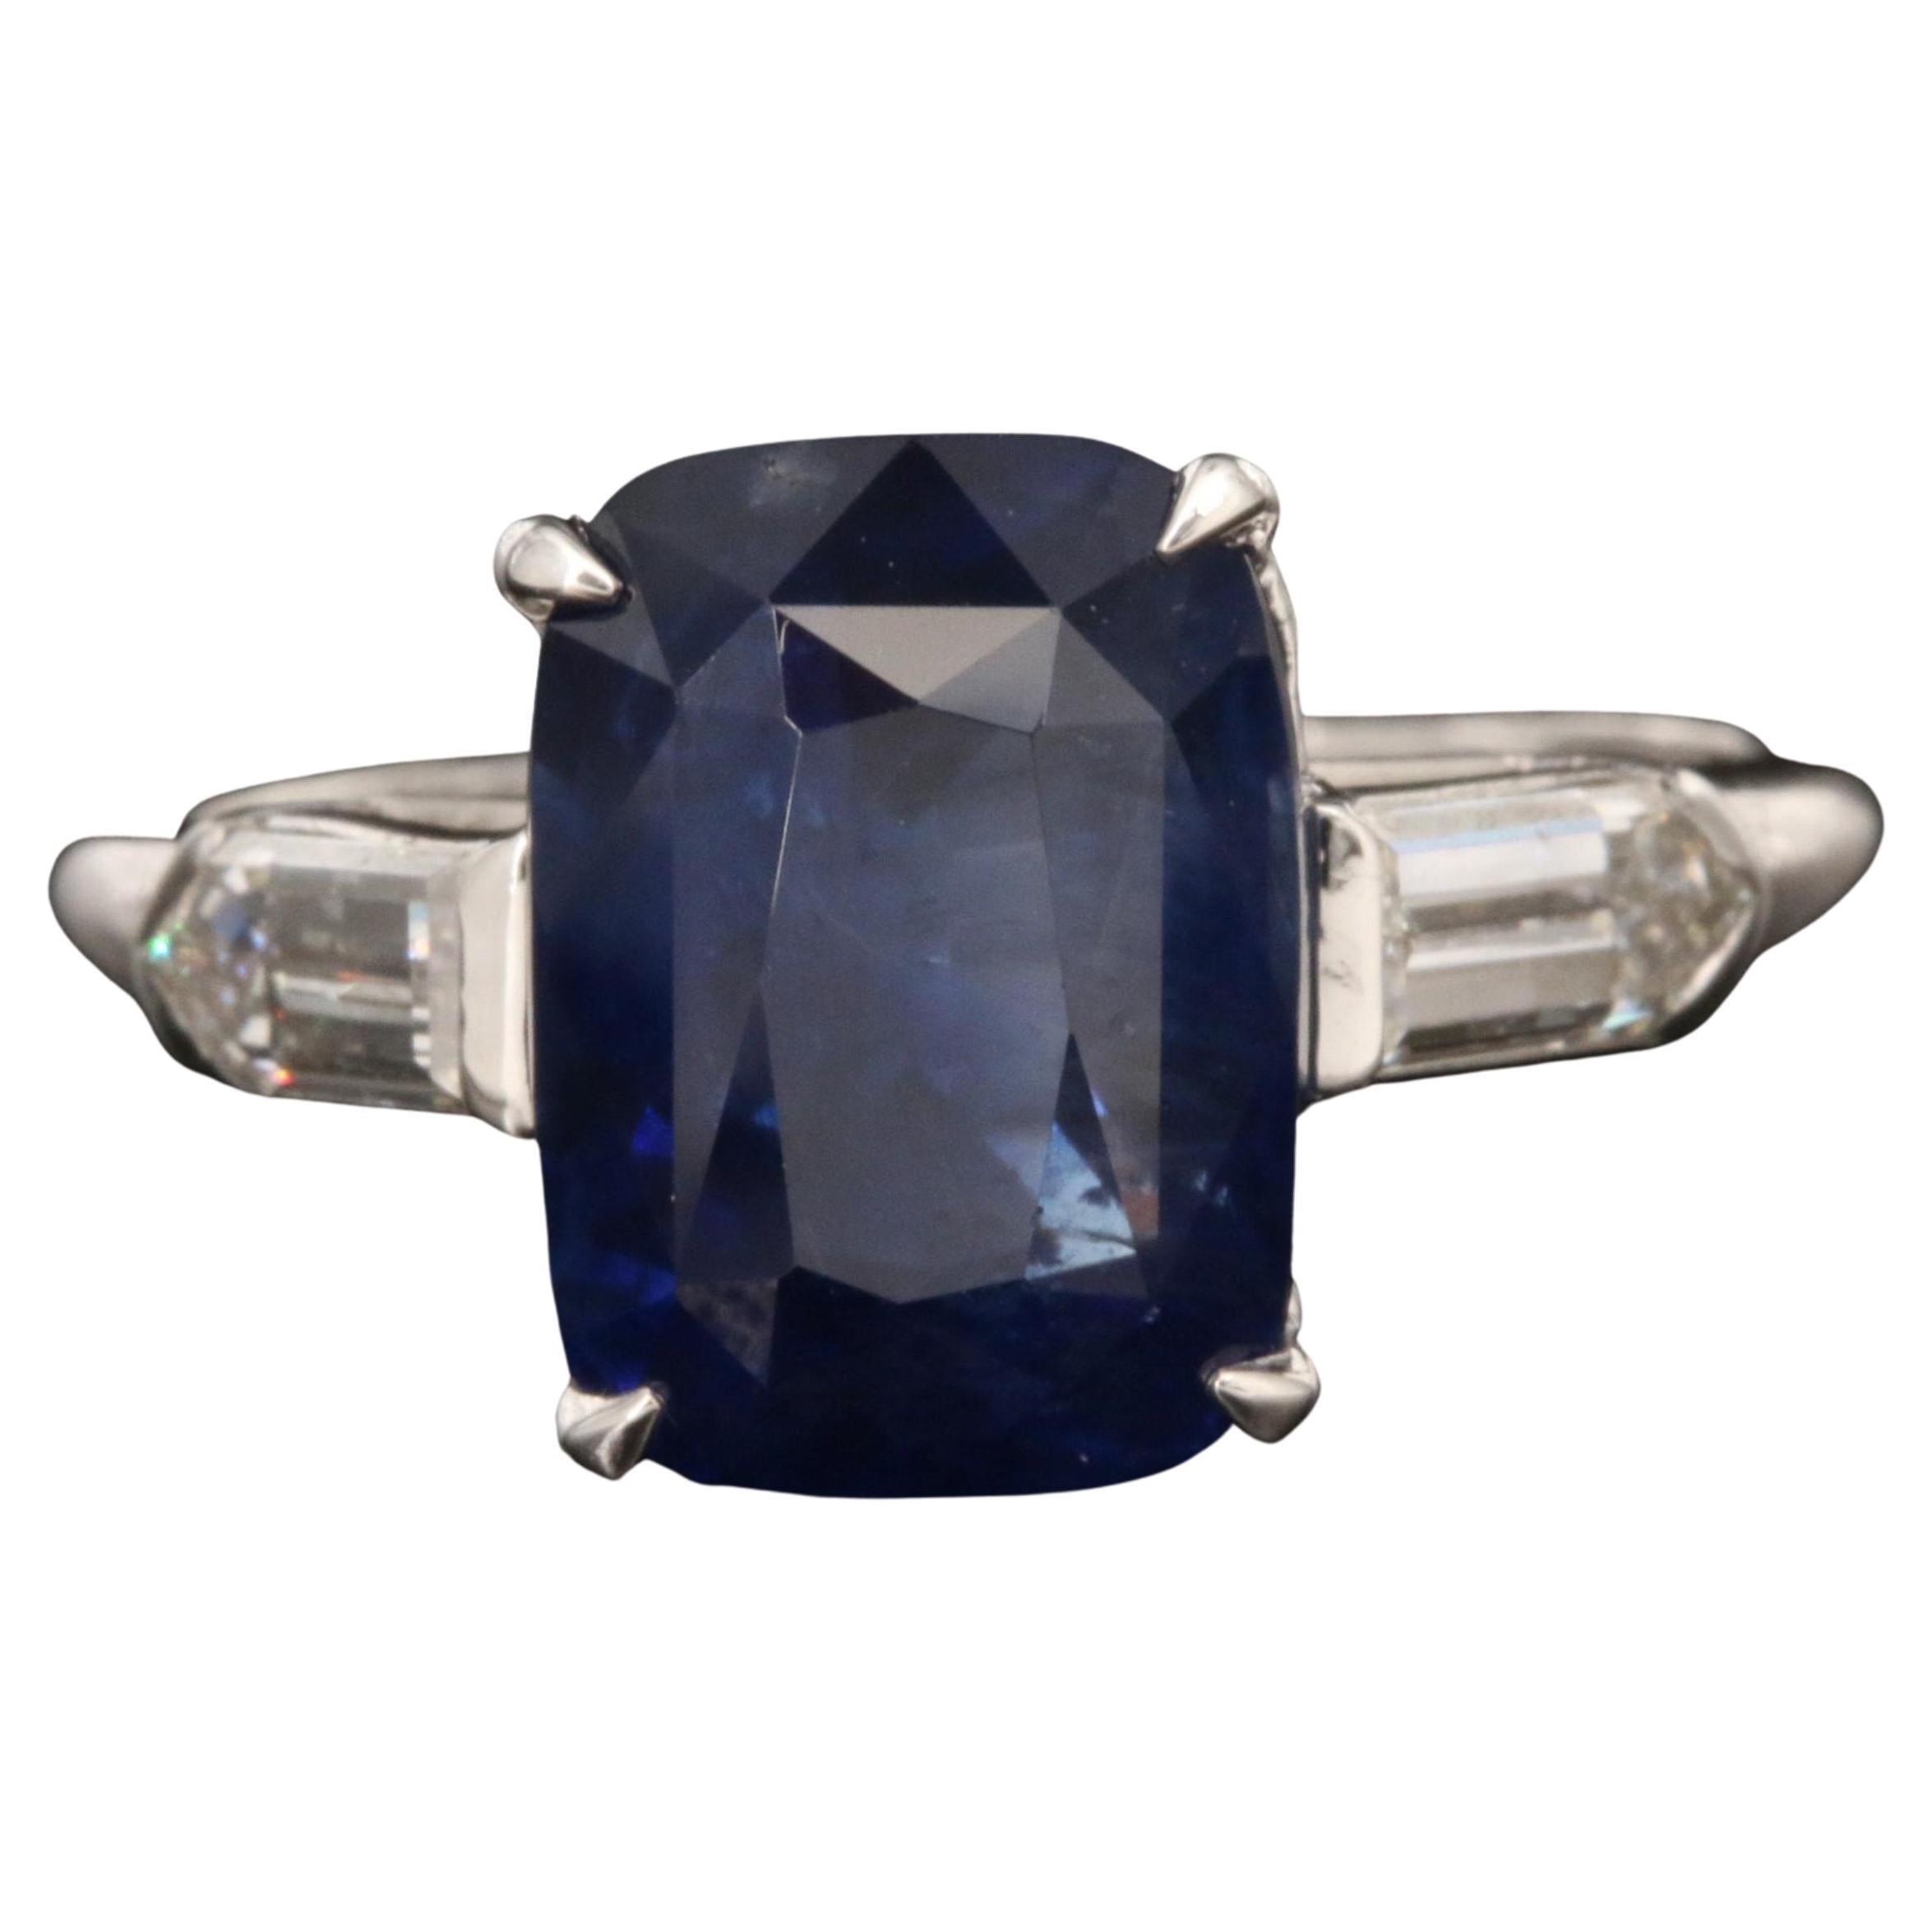 For Sale:  5 Carat Sapphire and Diamond Engagement Ring, White Gold Three Stone Ring